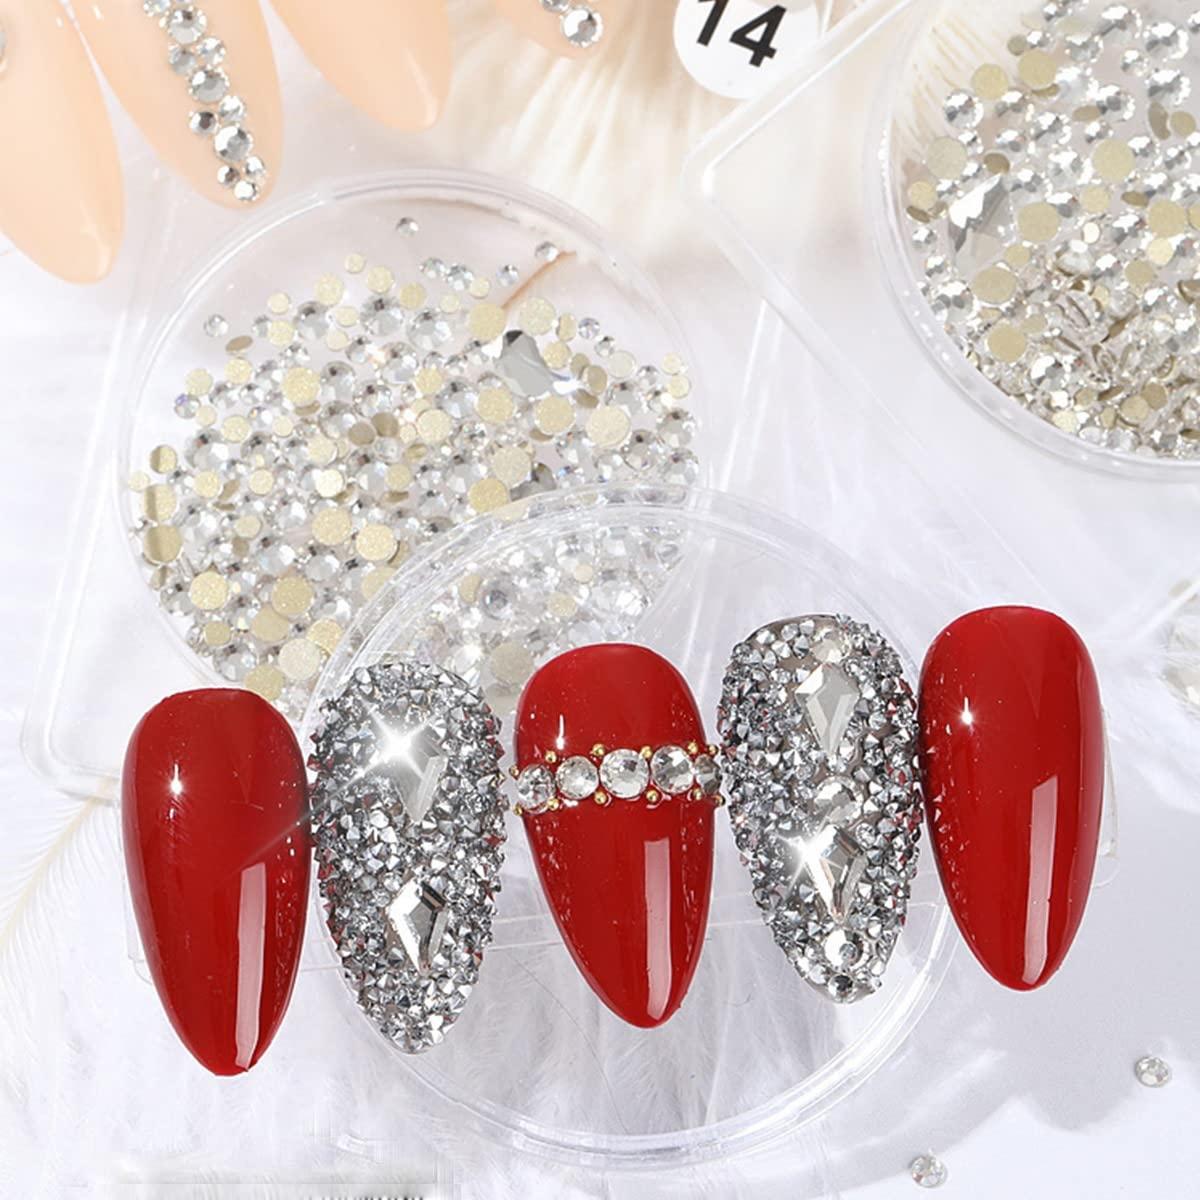 Mixed Size Crystal Diamond Small Rhinestones For Nails For Nail Art  Flatback Glasses Sequins Charms In Red, Blue, And AB Colors NA053 From  Fcf77549123, $2.21